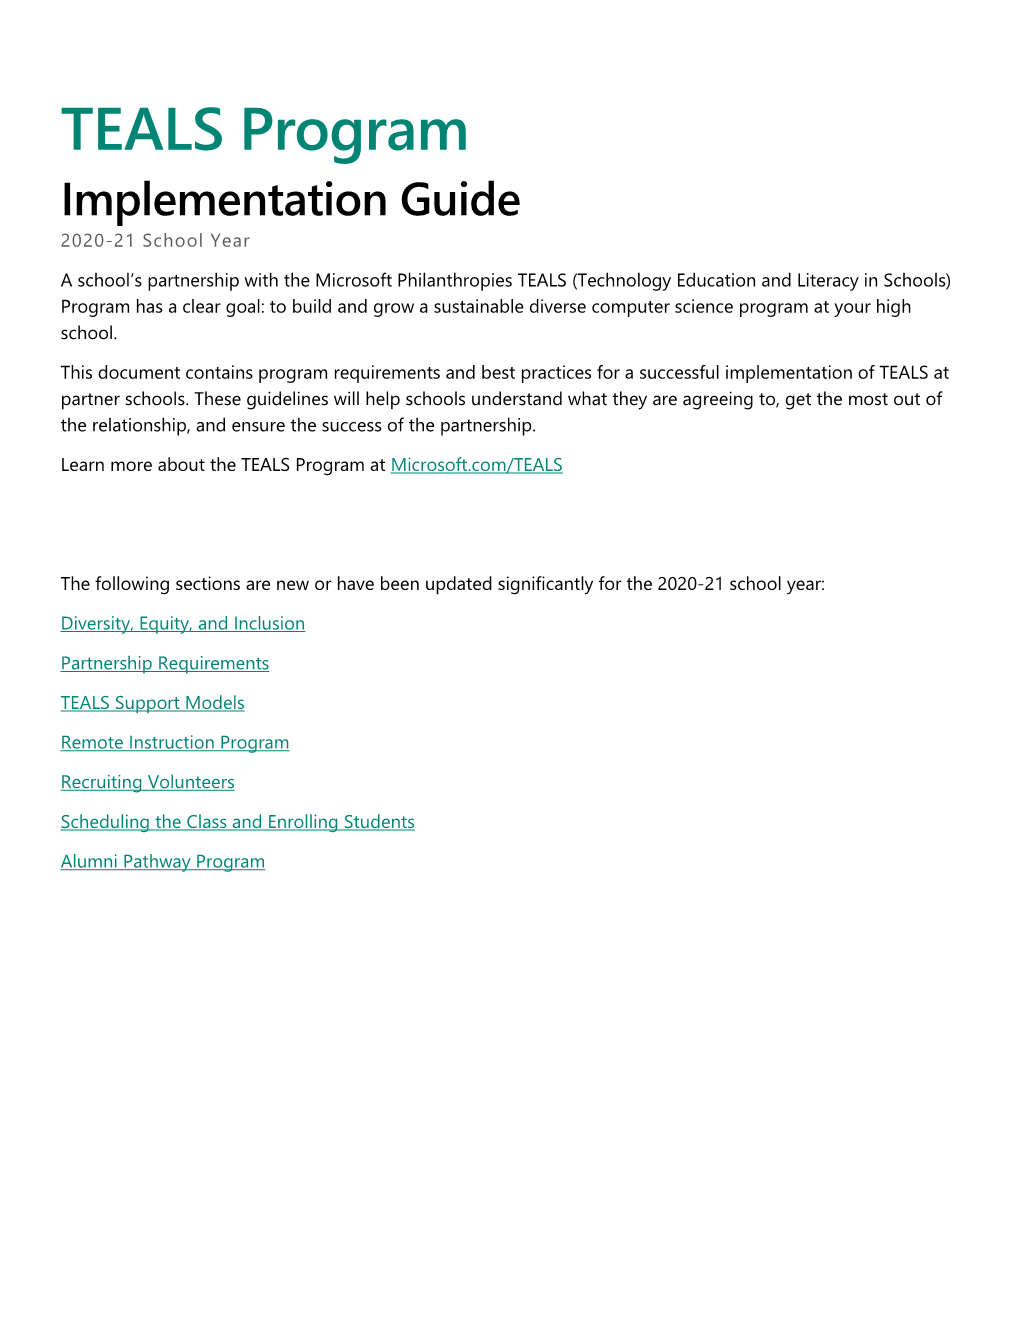 Implementation Guide 2020-21 School Year